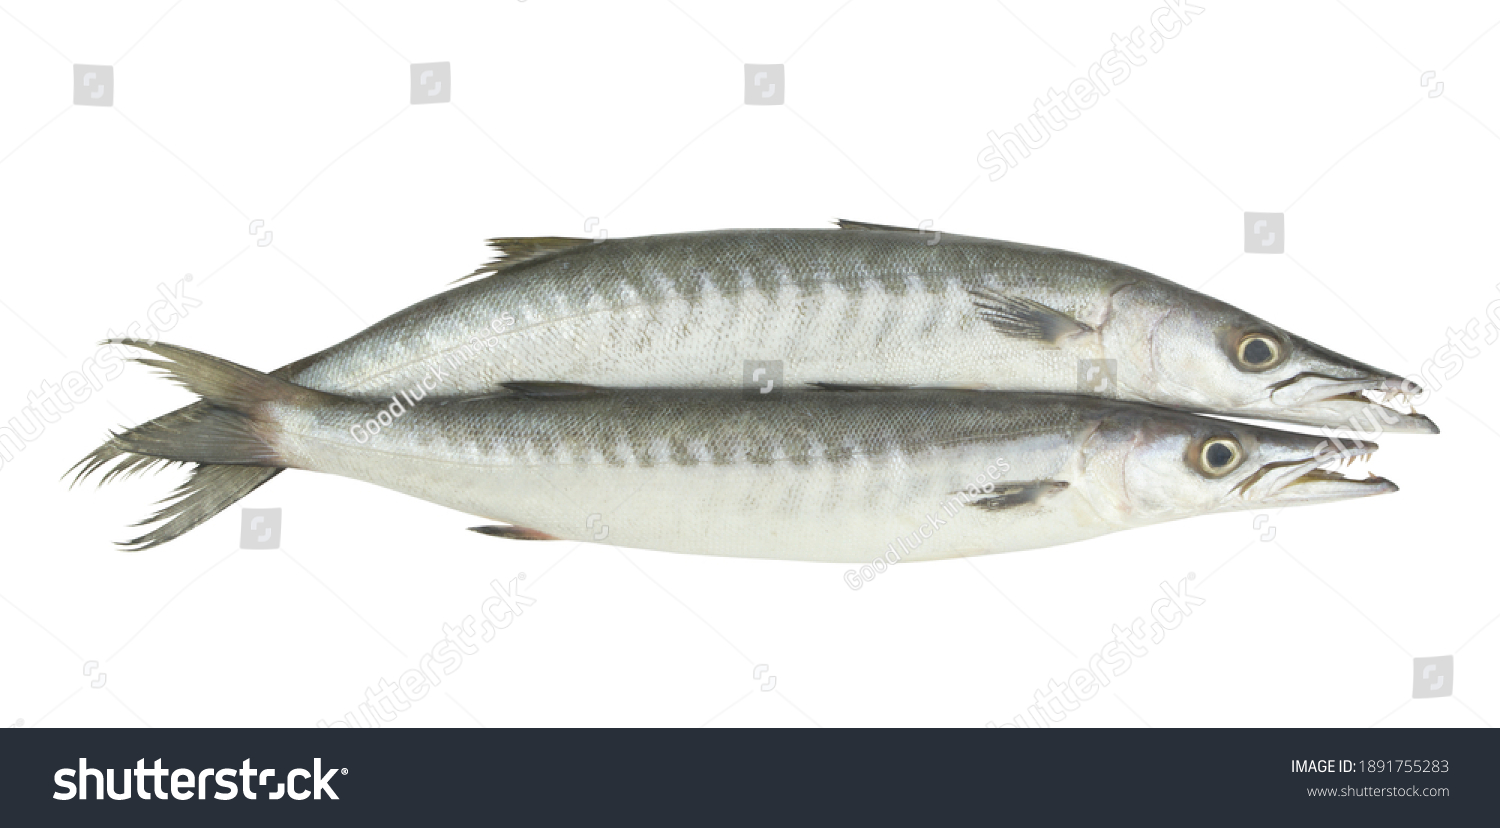 Two barracuda fishes isolated on white background #1891755283